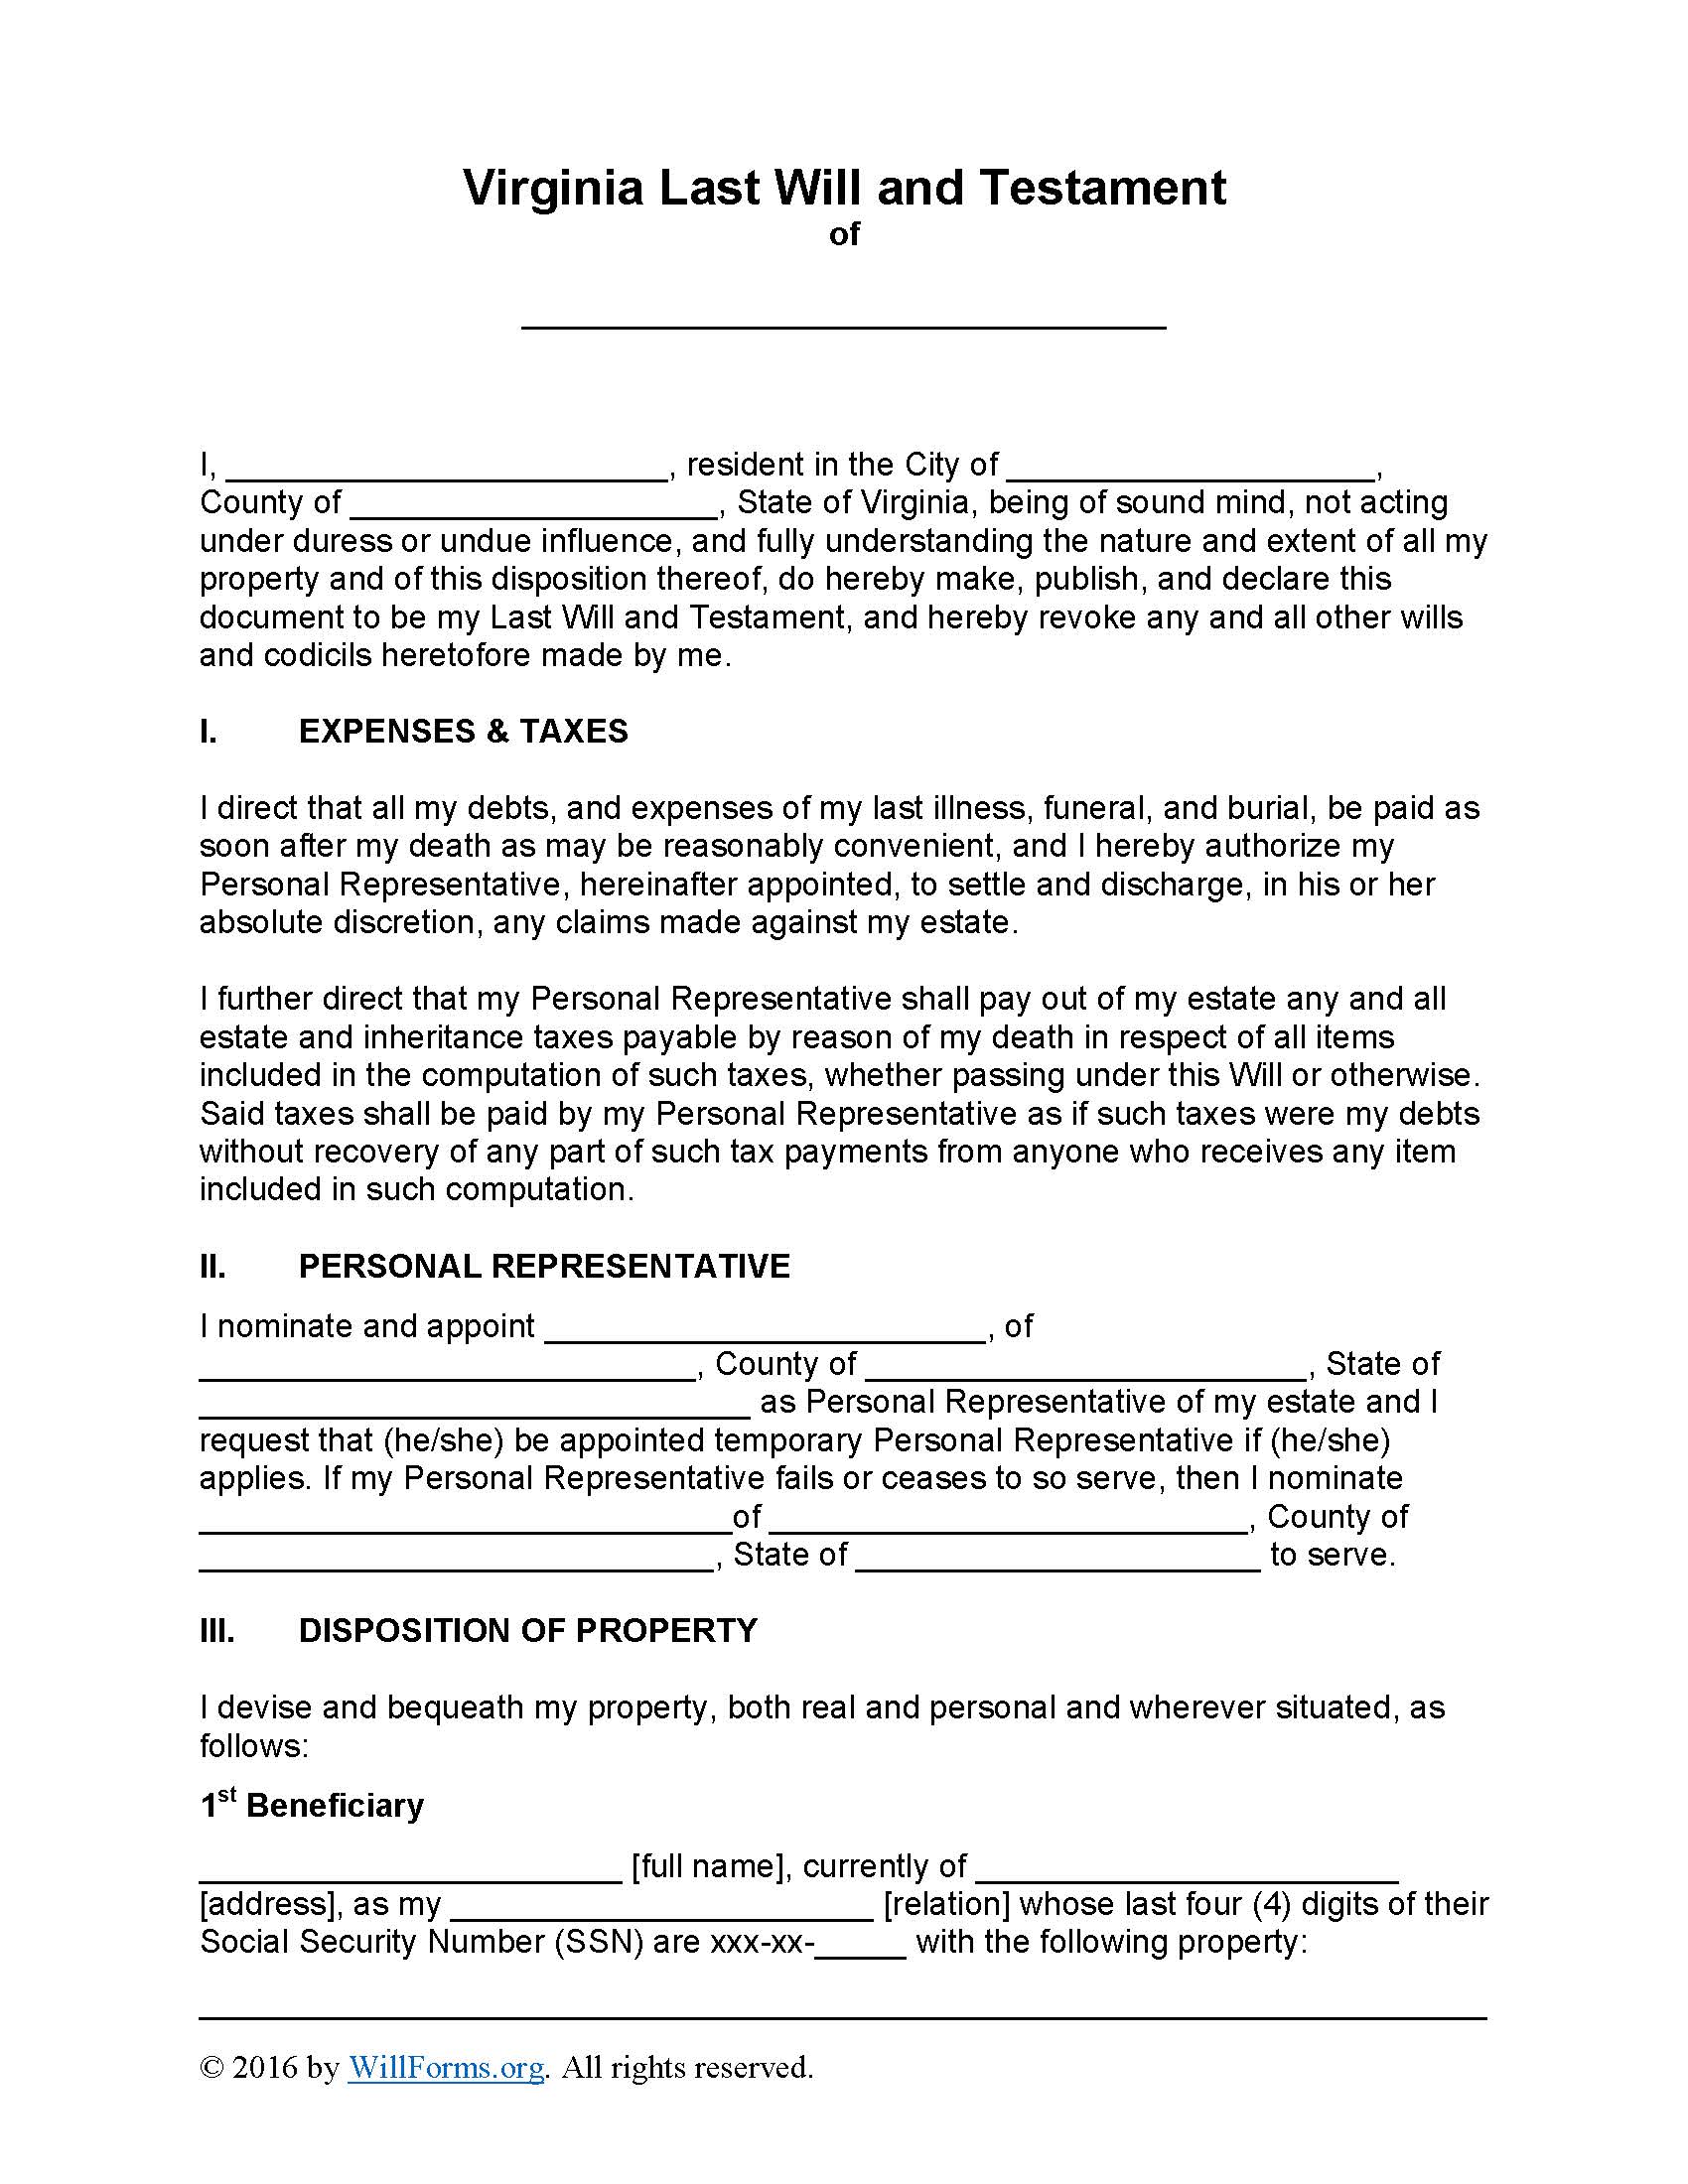 Virginia Last Will and Testament Form